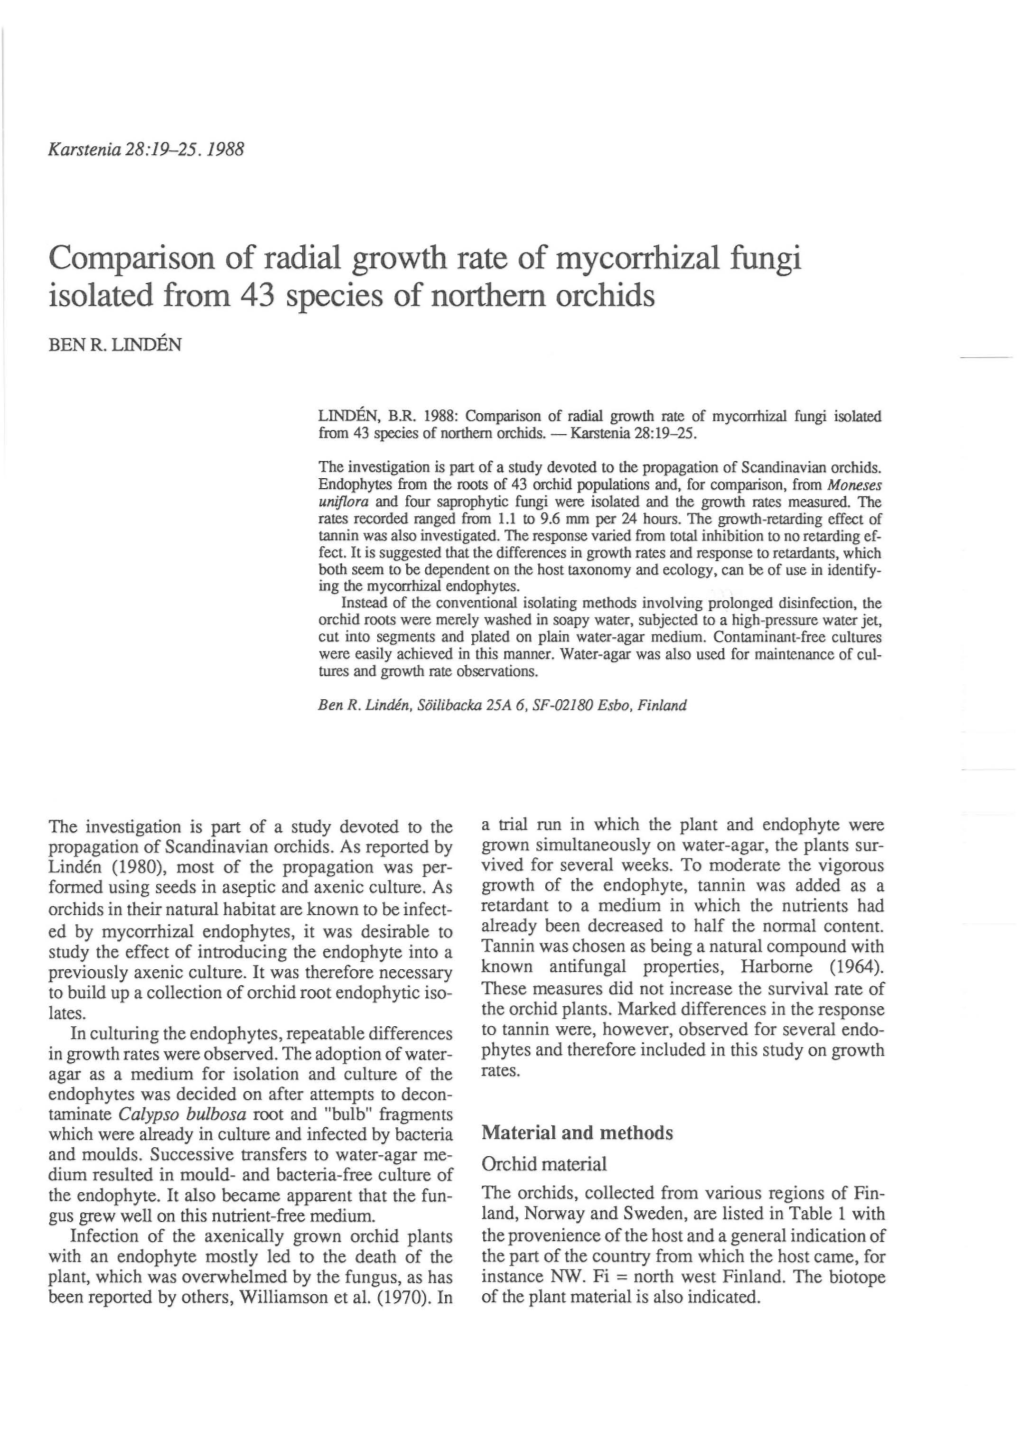 Comparison of Radial Growth Rate of Mycorrhizal Fungi Isolated from 43 Species of Northern Orchids